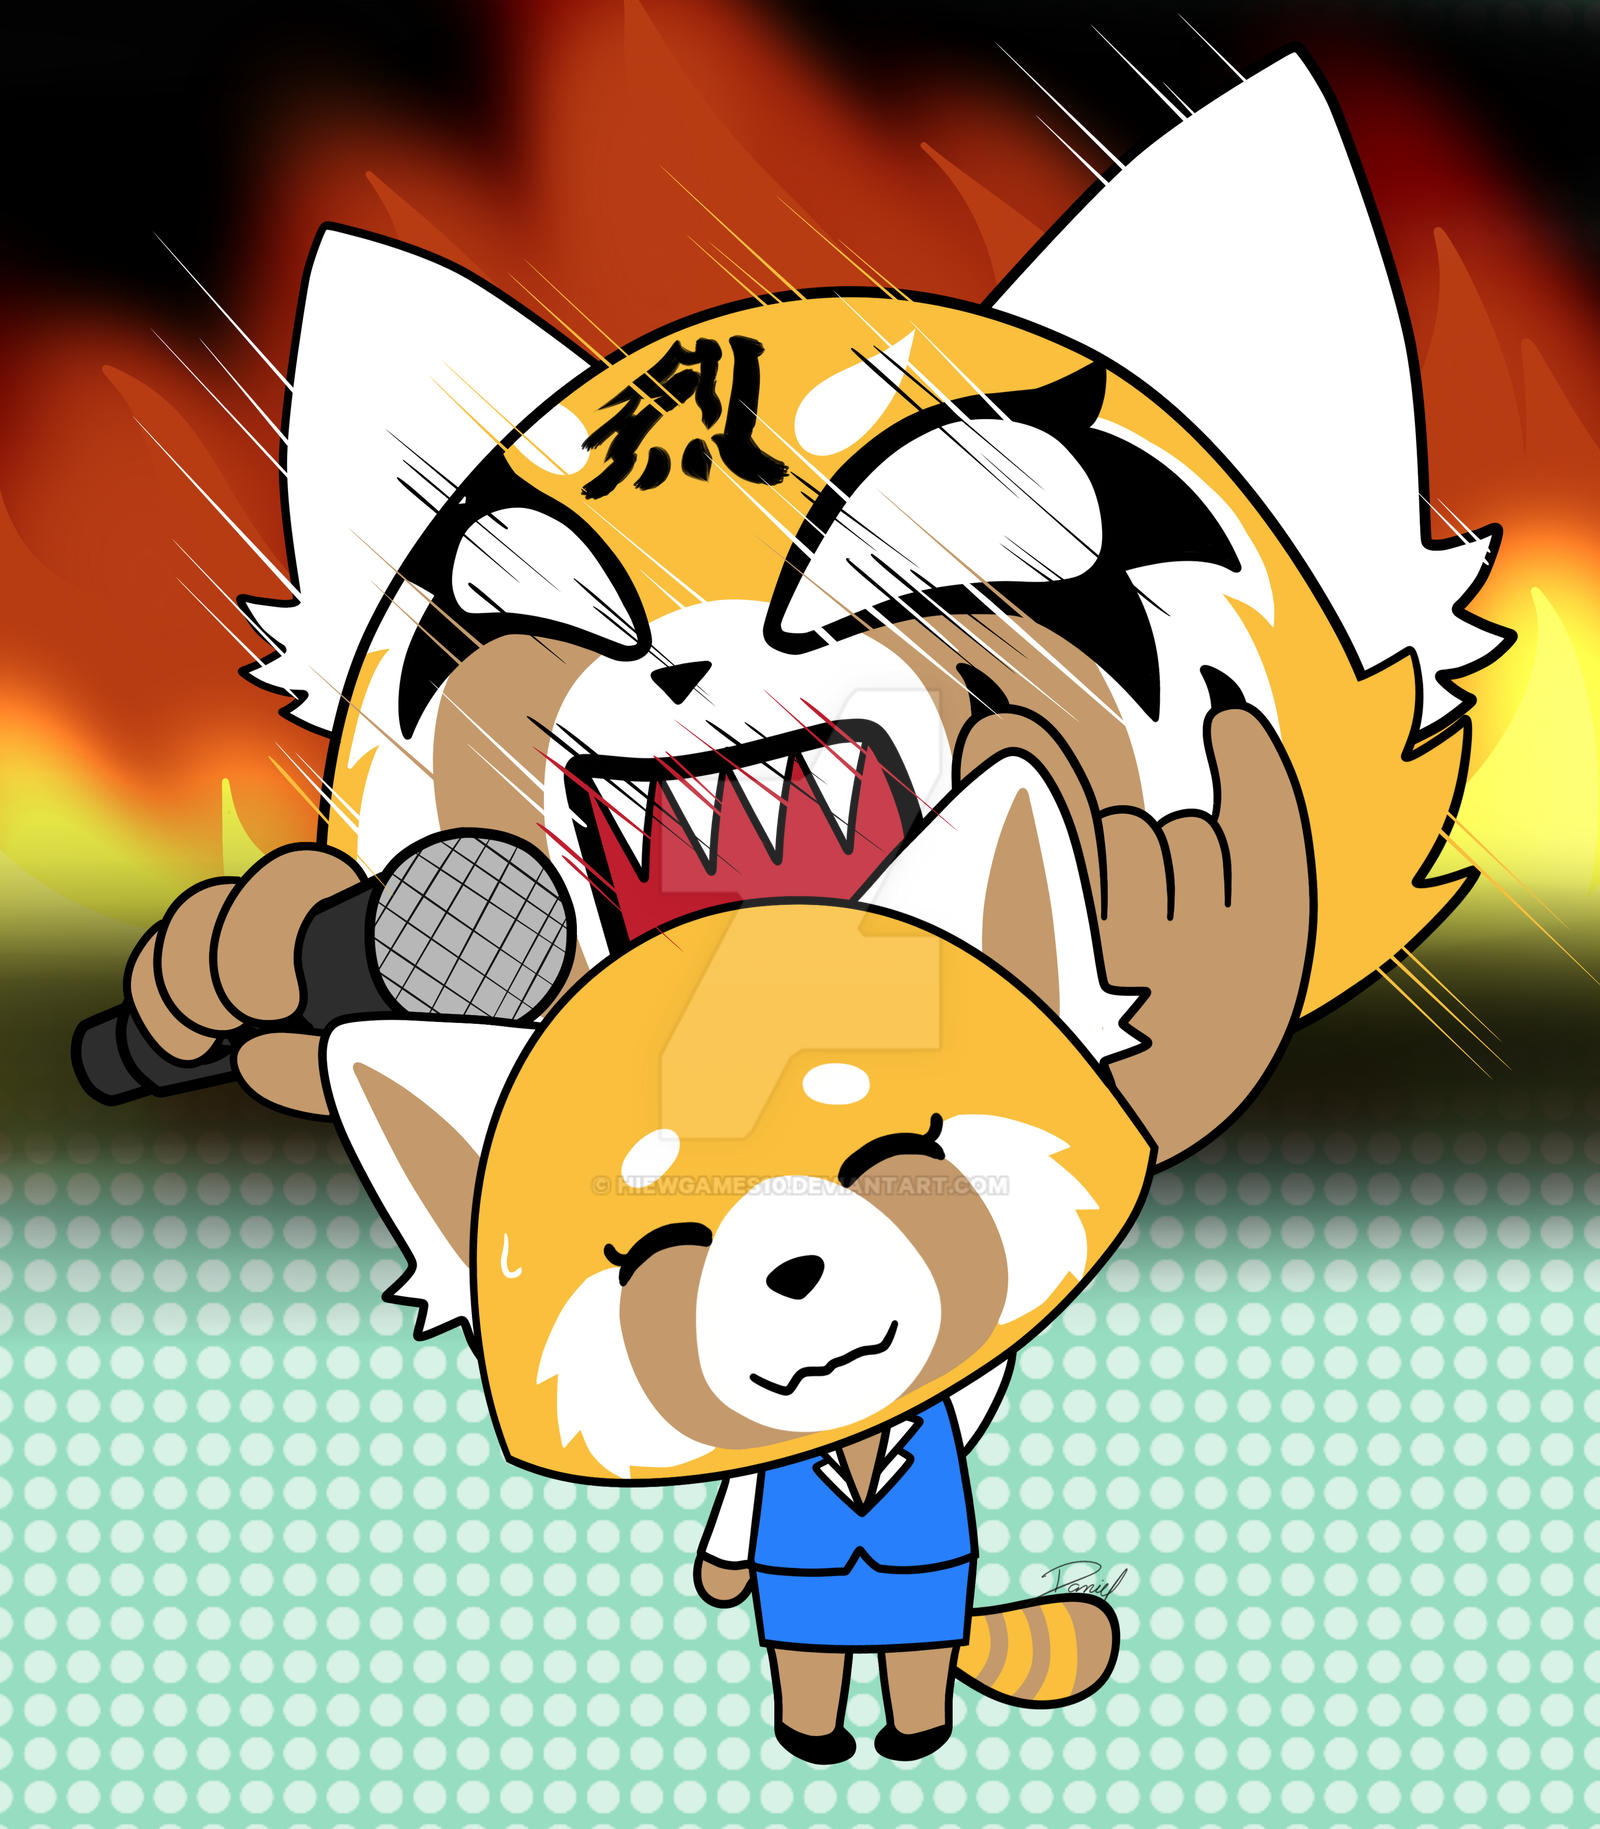 Aggretsuko by HiewGames10 on DeviantArt